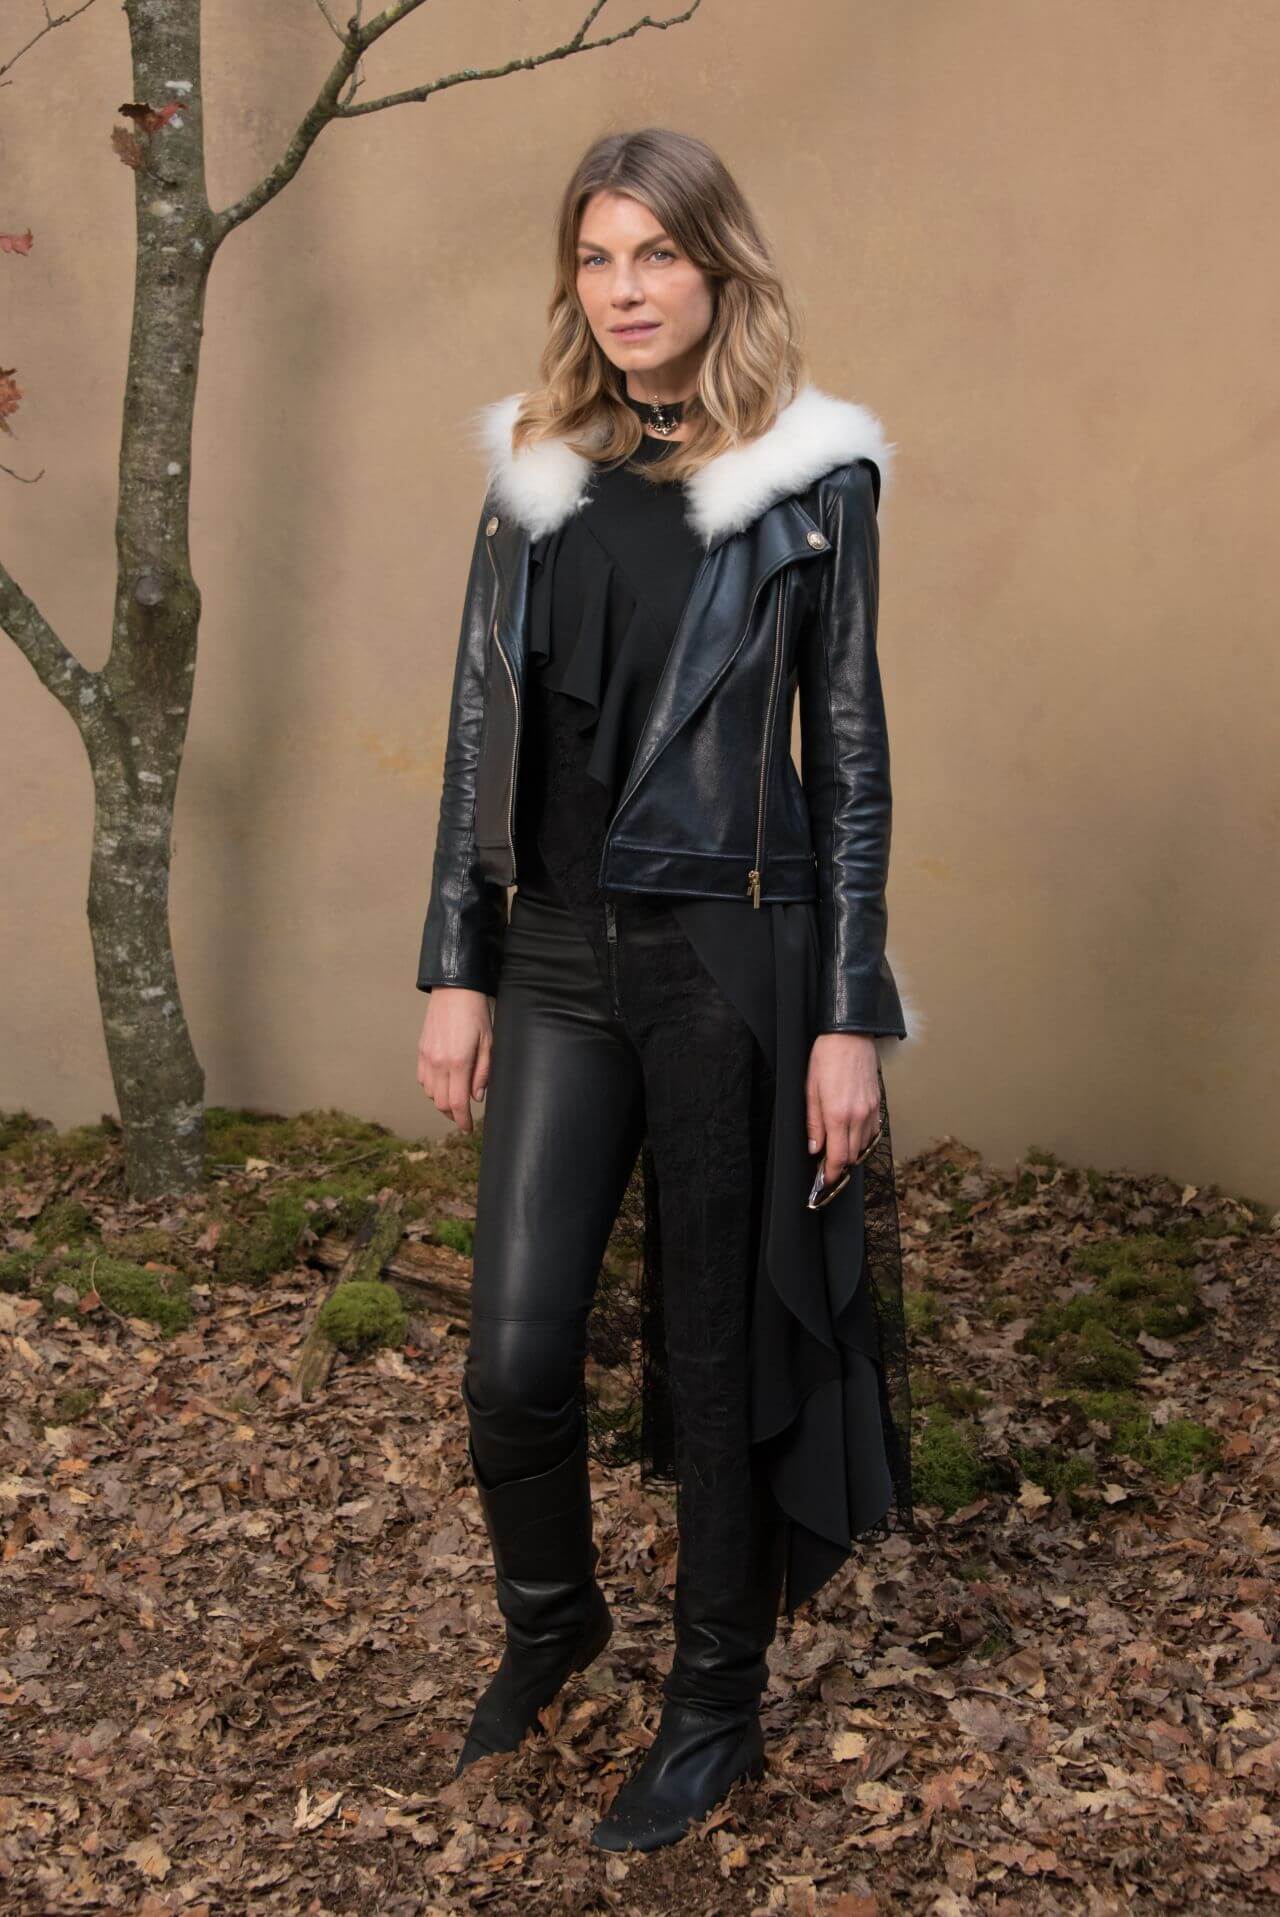 Angela Lindvall In Black Ruffle Top With Leather Pants With Jacket At Chanel Fashion Show FW18 in Paris